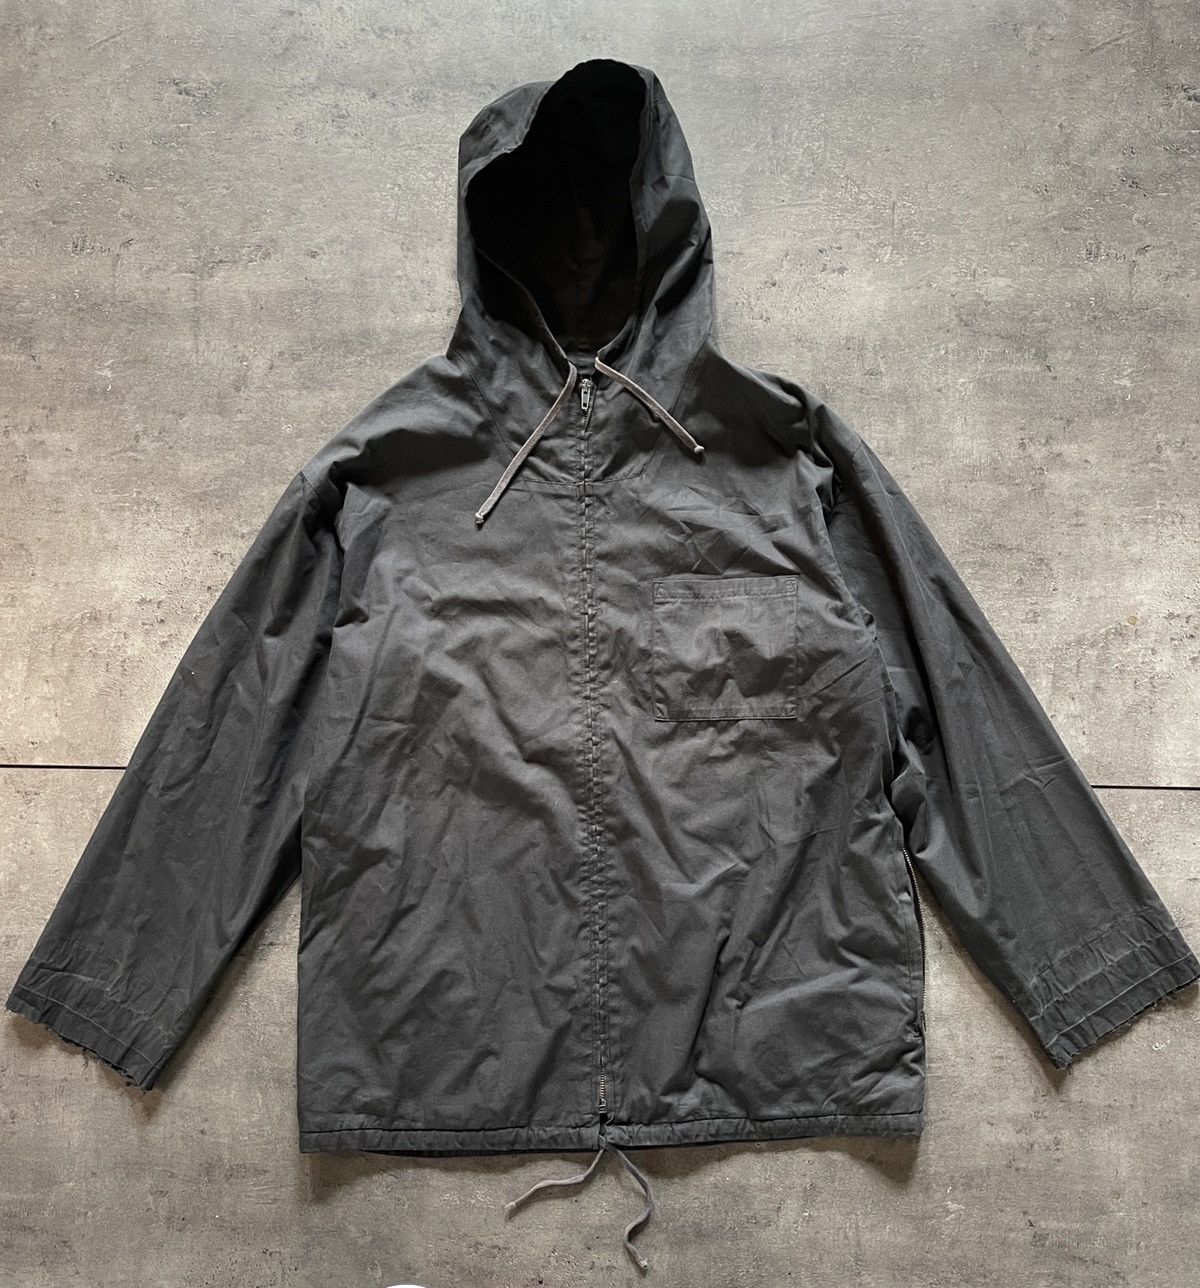 Helmut Lang AW98 COTTON HOODED JACKET | Grailed